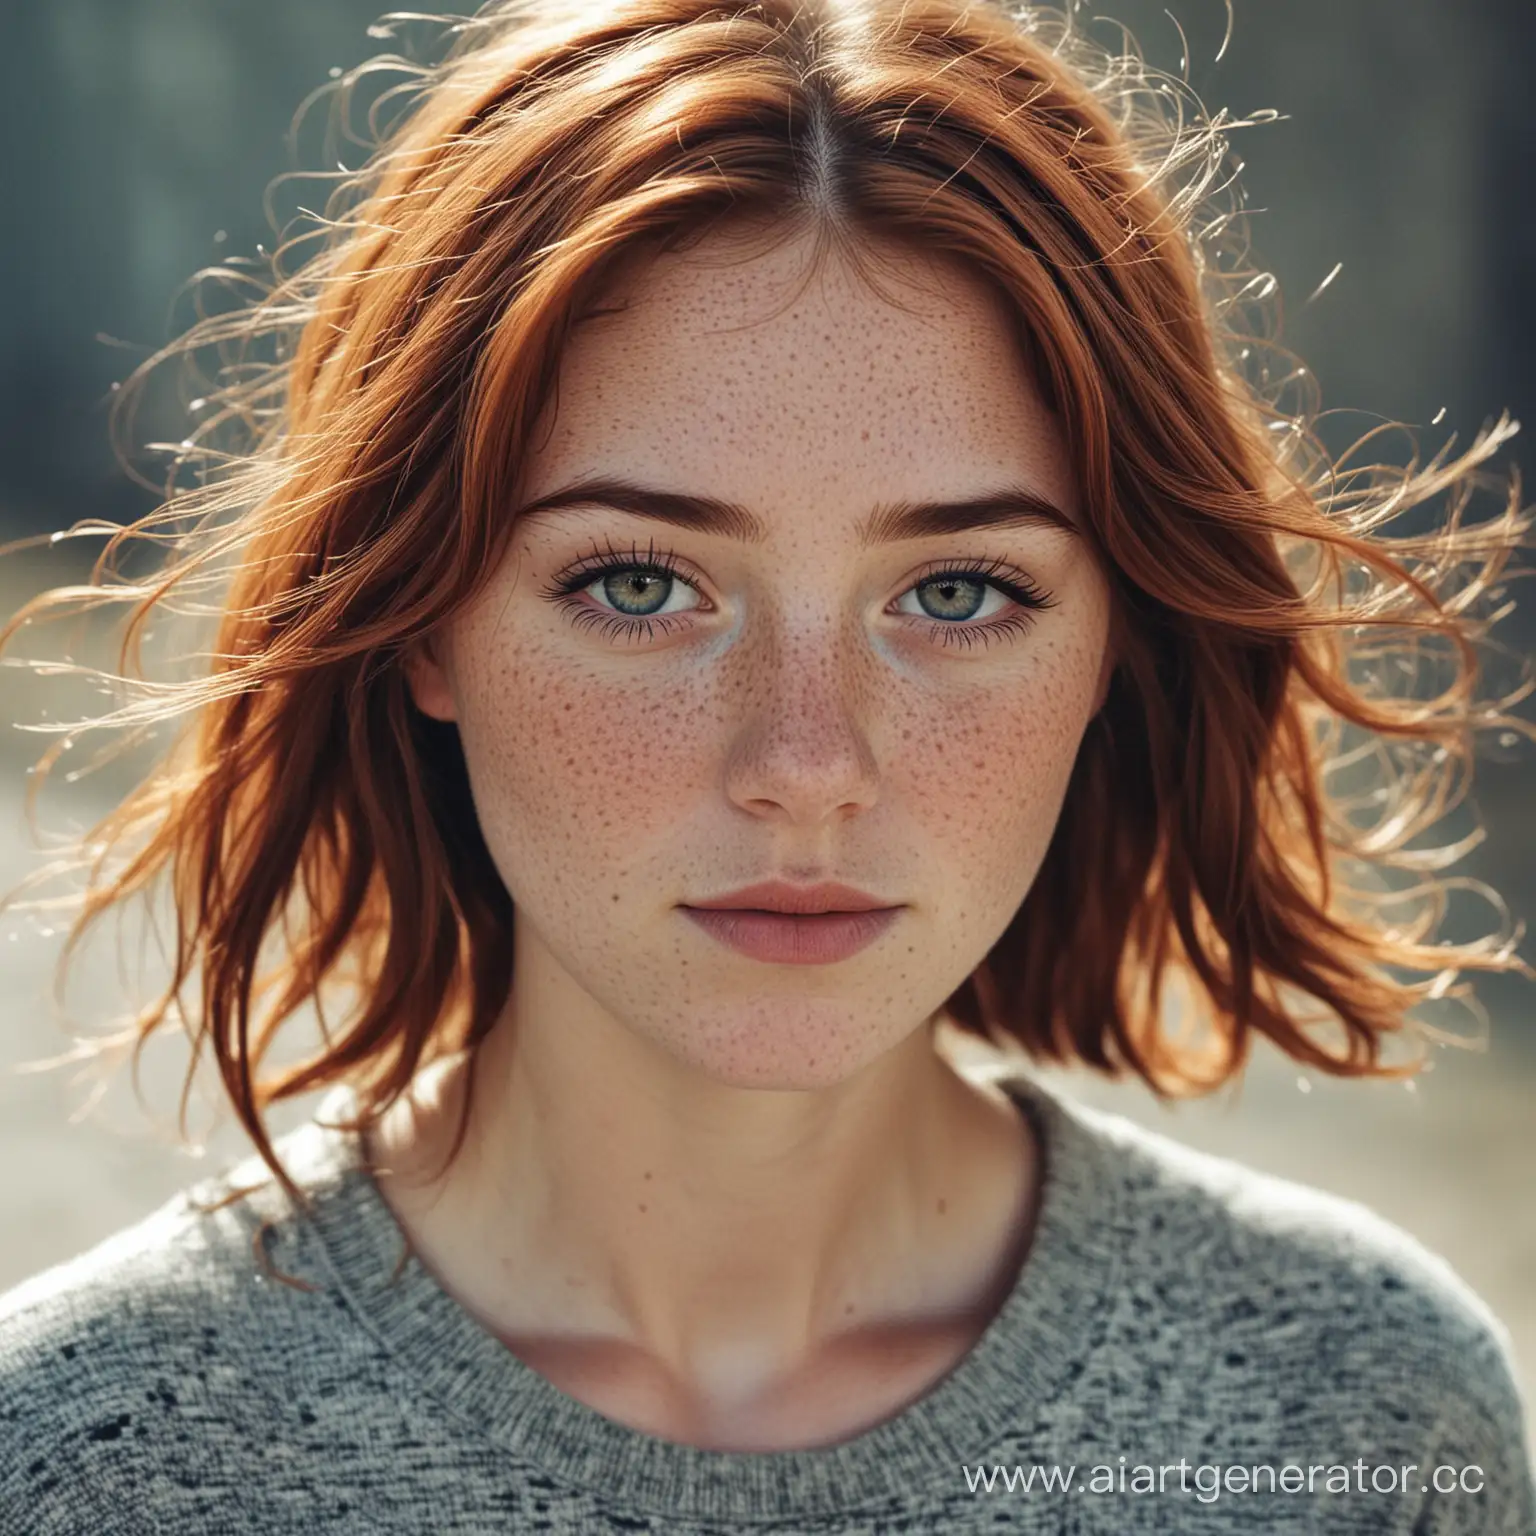 Stylish-Young-Girl-with-Freckles-Trendy-Youth-Fashion-Portrait